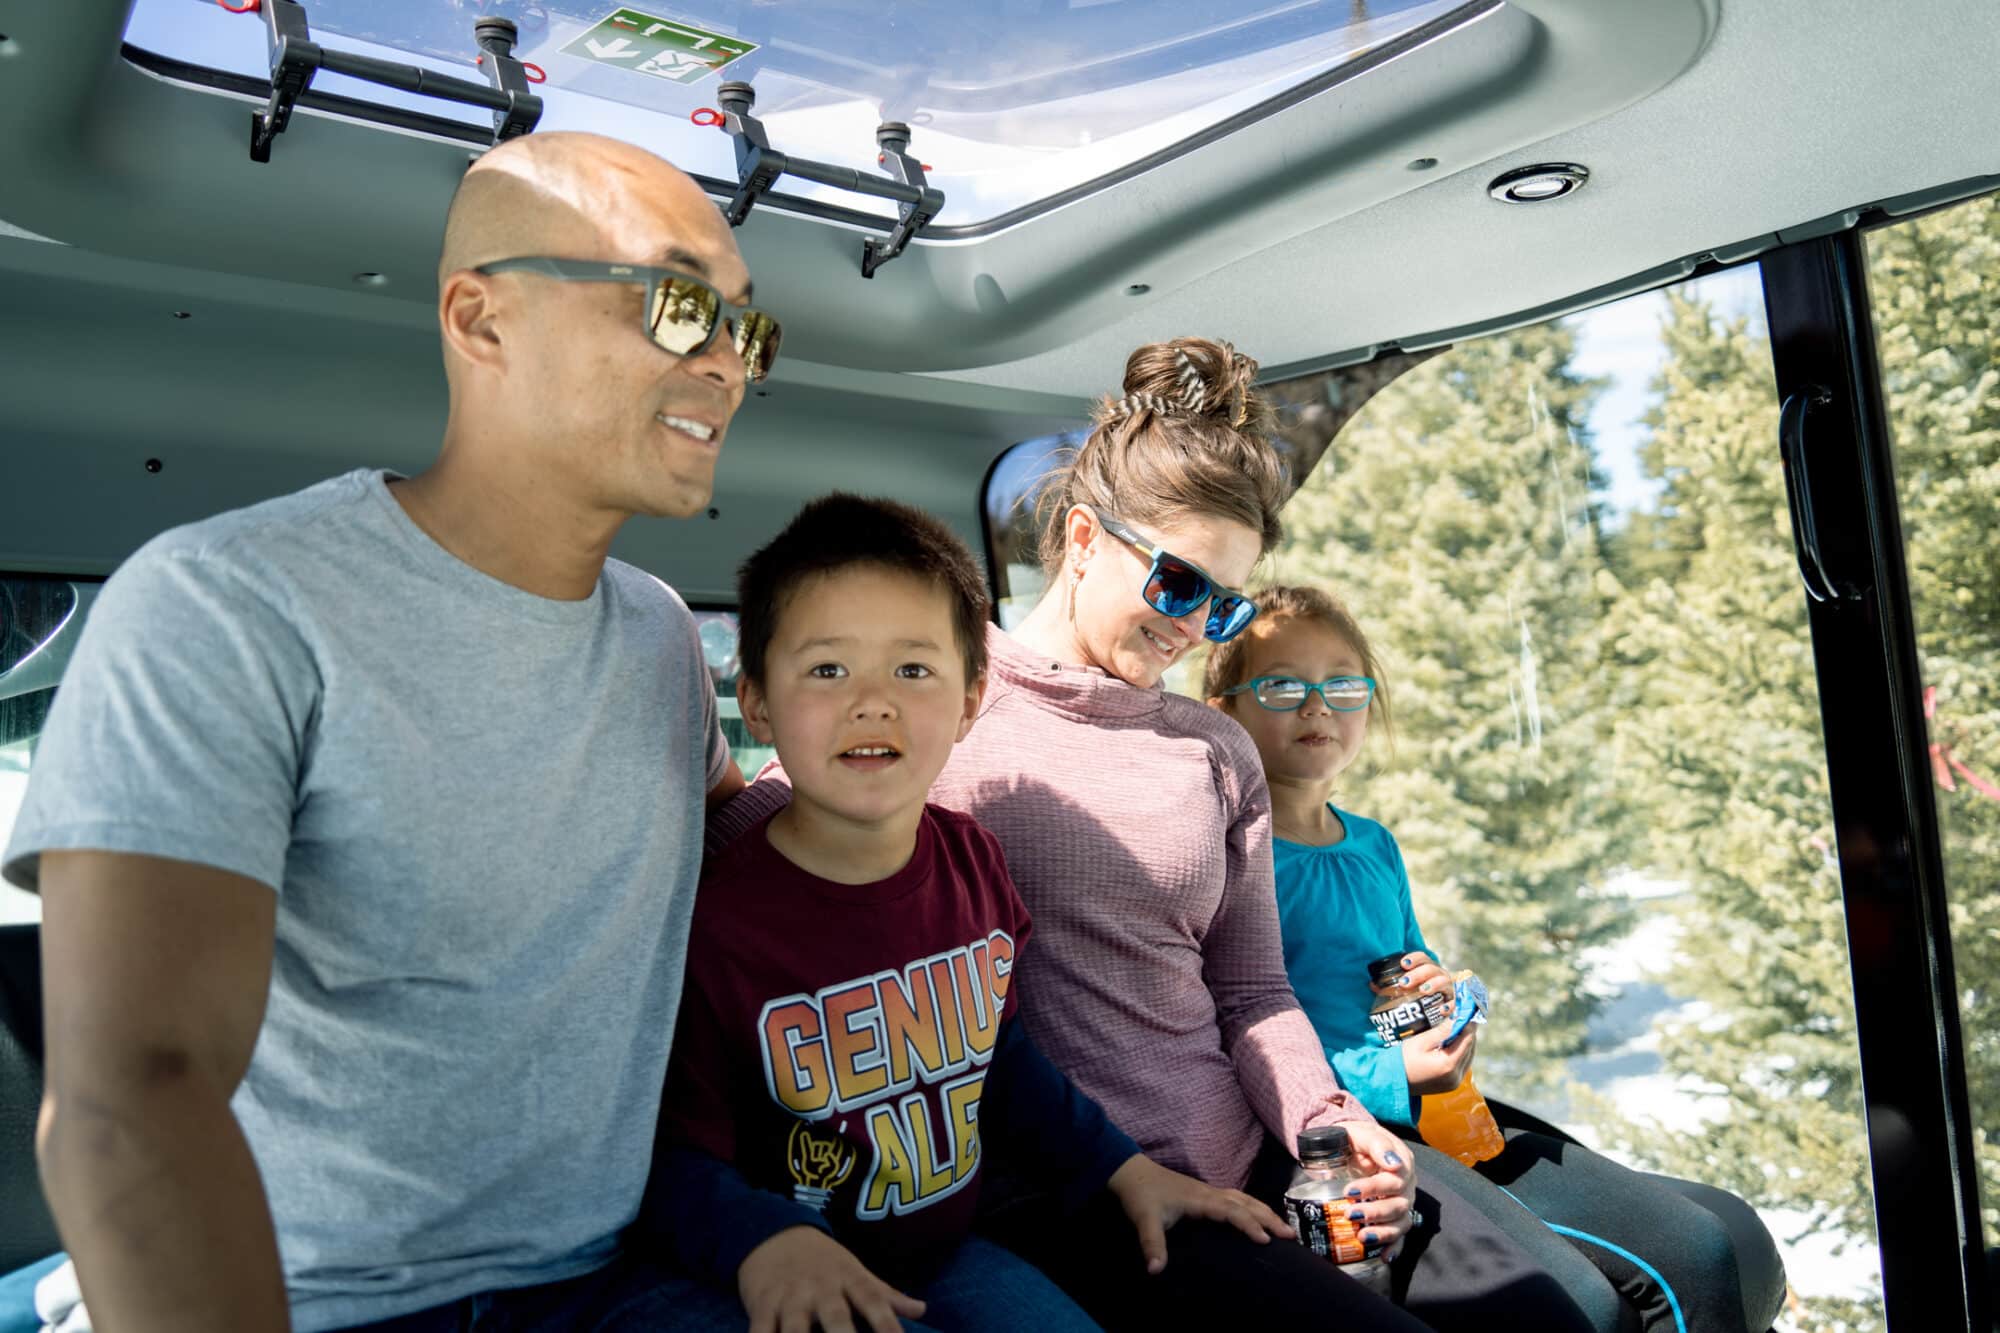 Family rides in luxury in the passenger cabin of the scenic snowcat